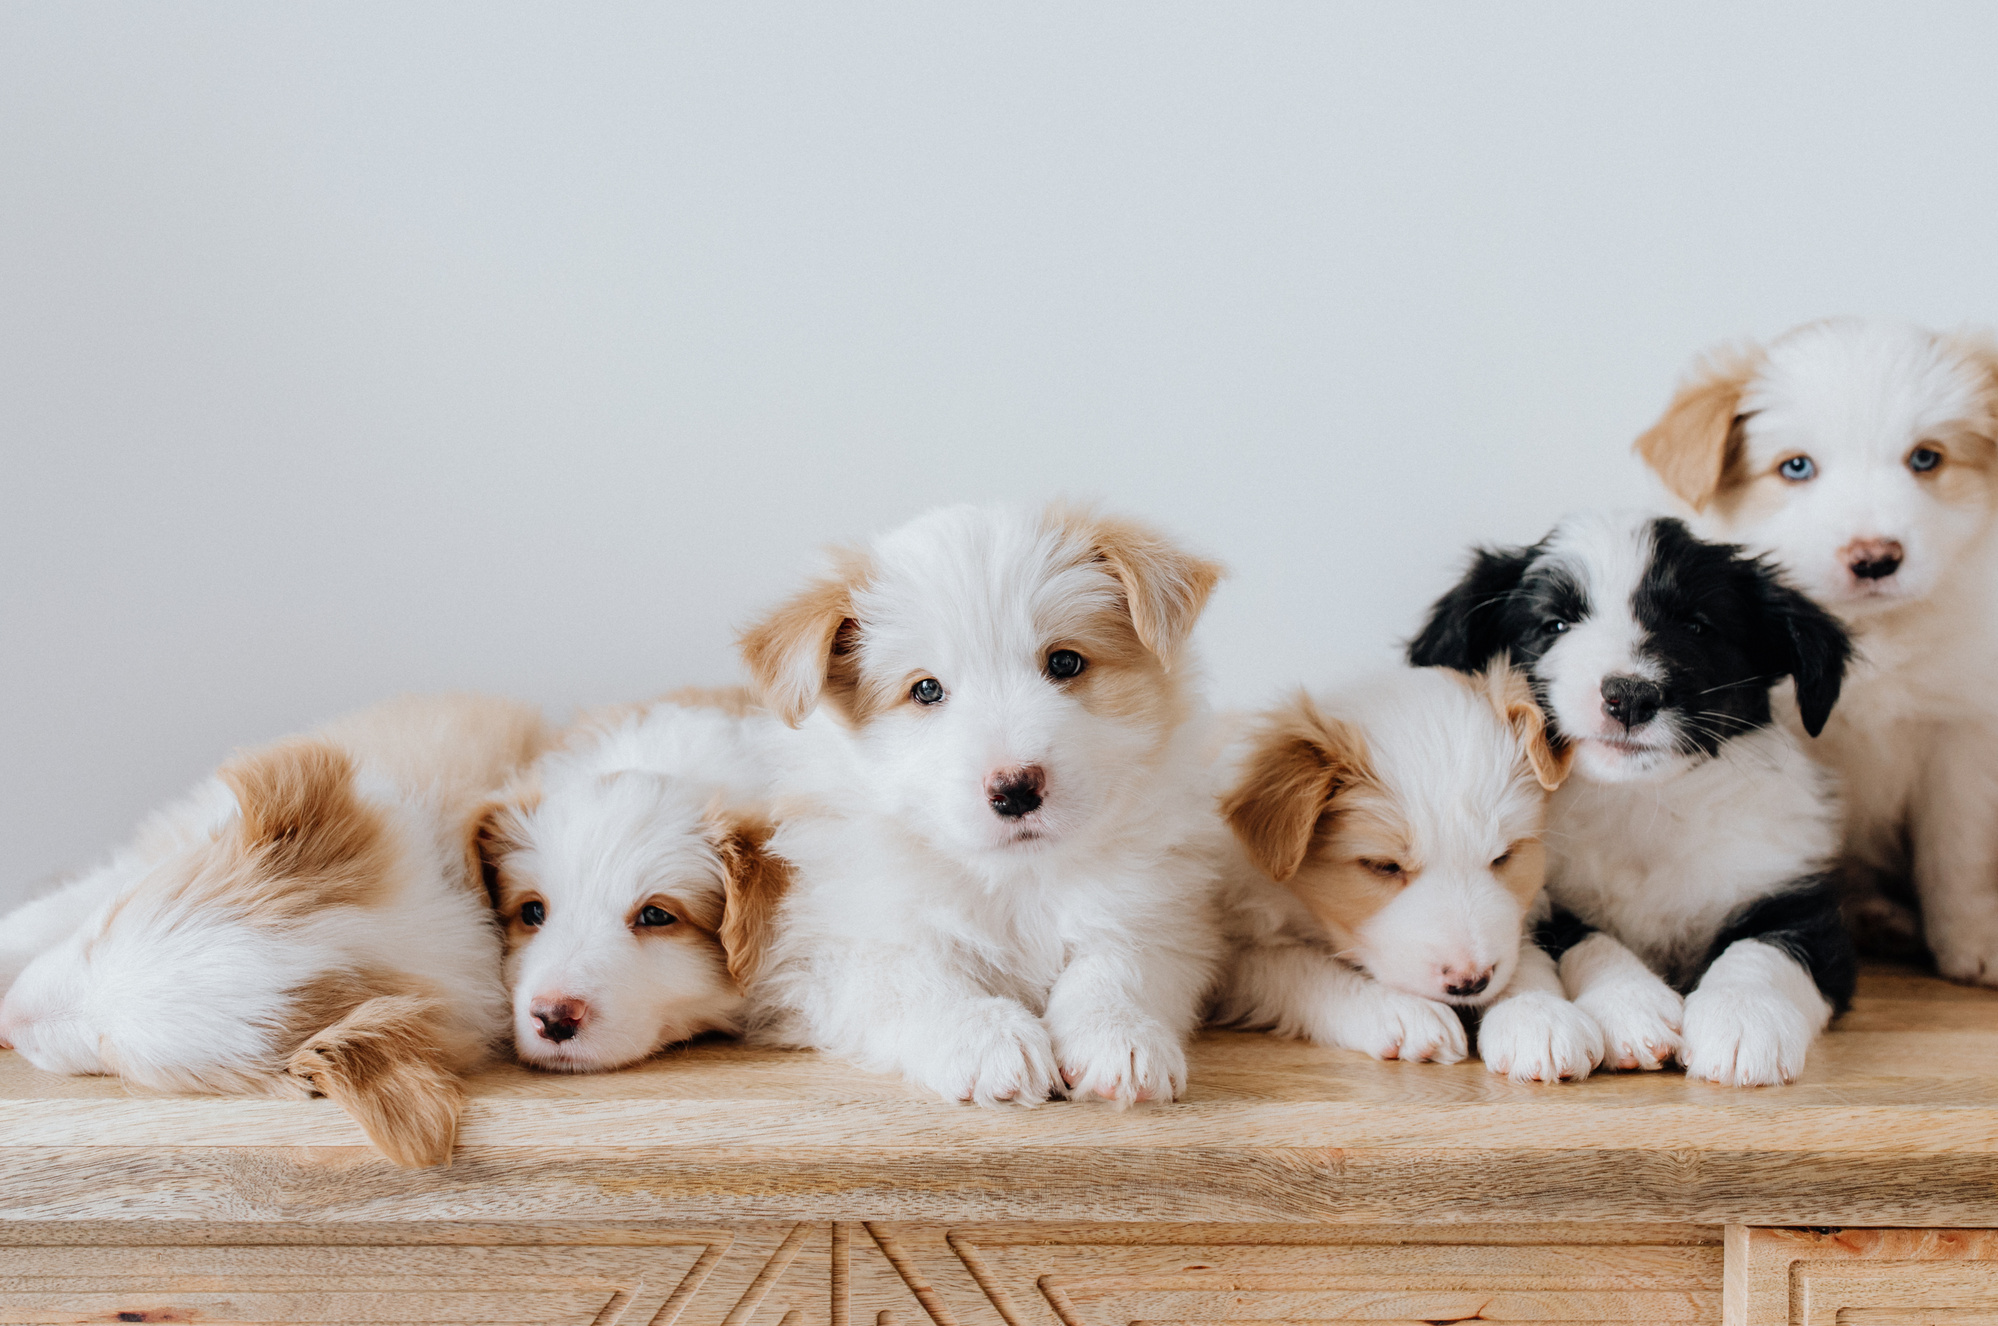 Cute Puppies Resting on Wooden Surface